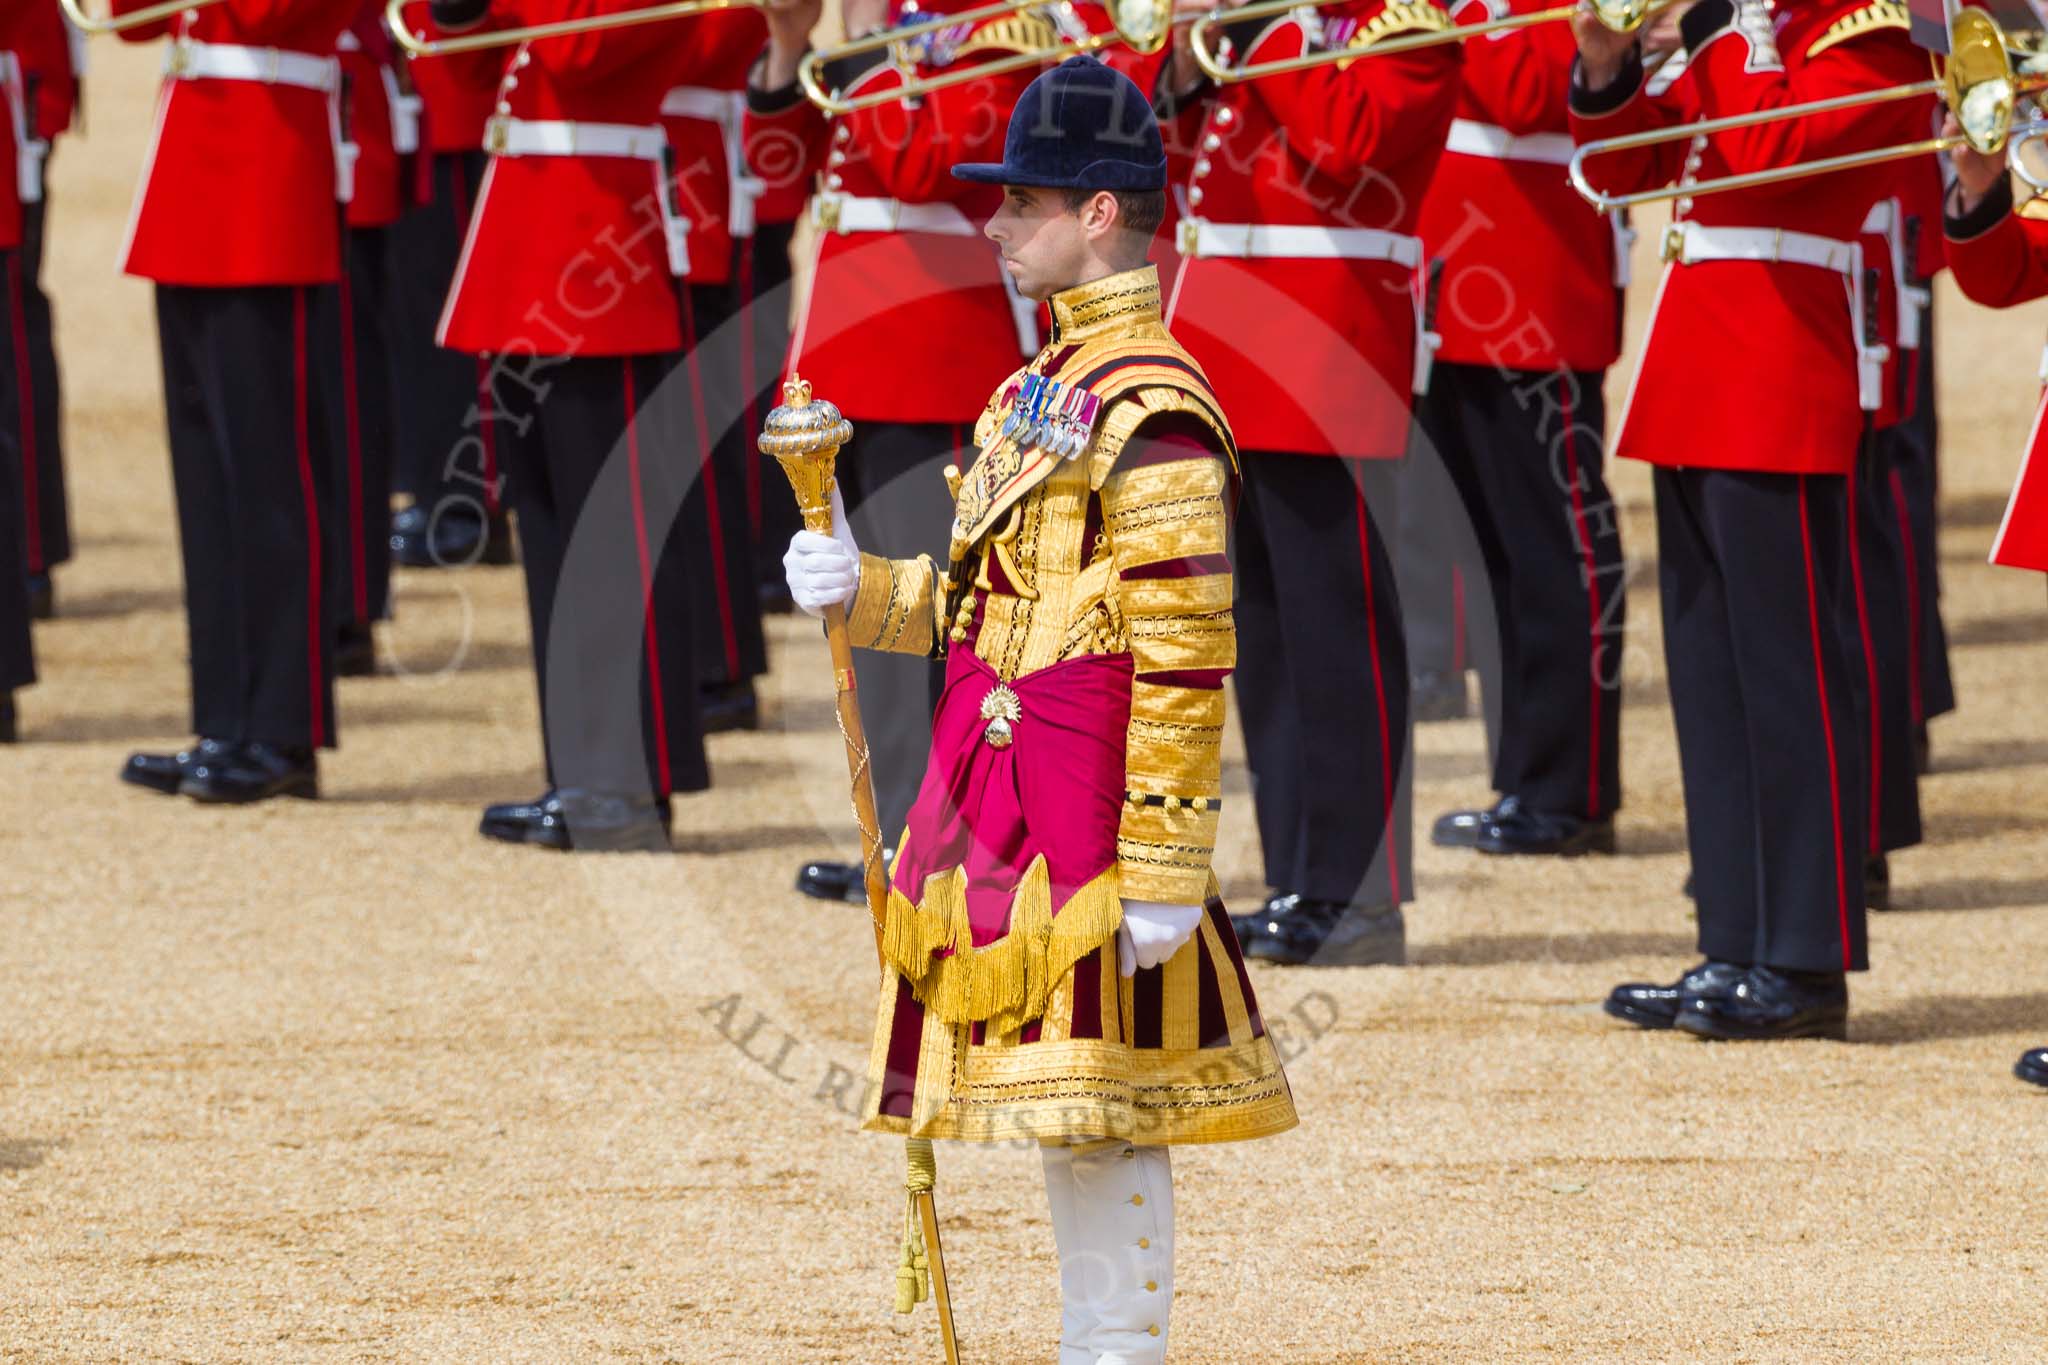 The Colonel's Review 2015.
Horse Guards Parade, Westminster,
London,

United Kingdom,
on 06 June 2015 at 11:10, image #272